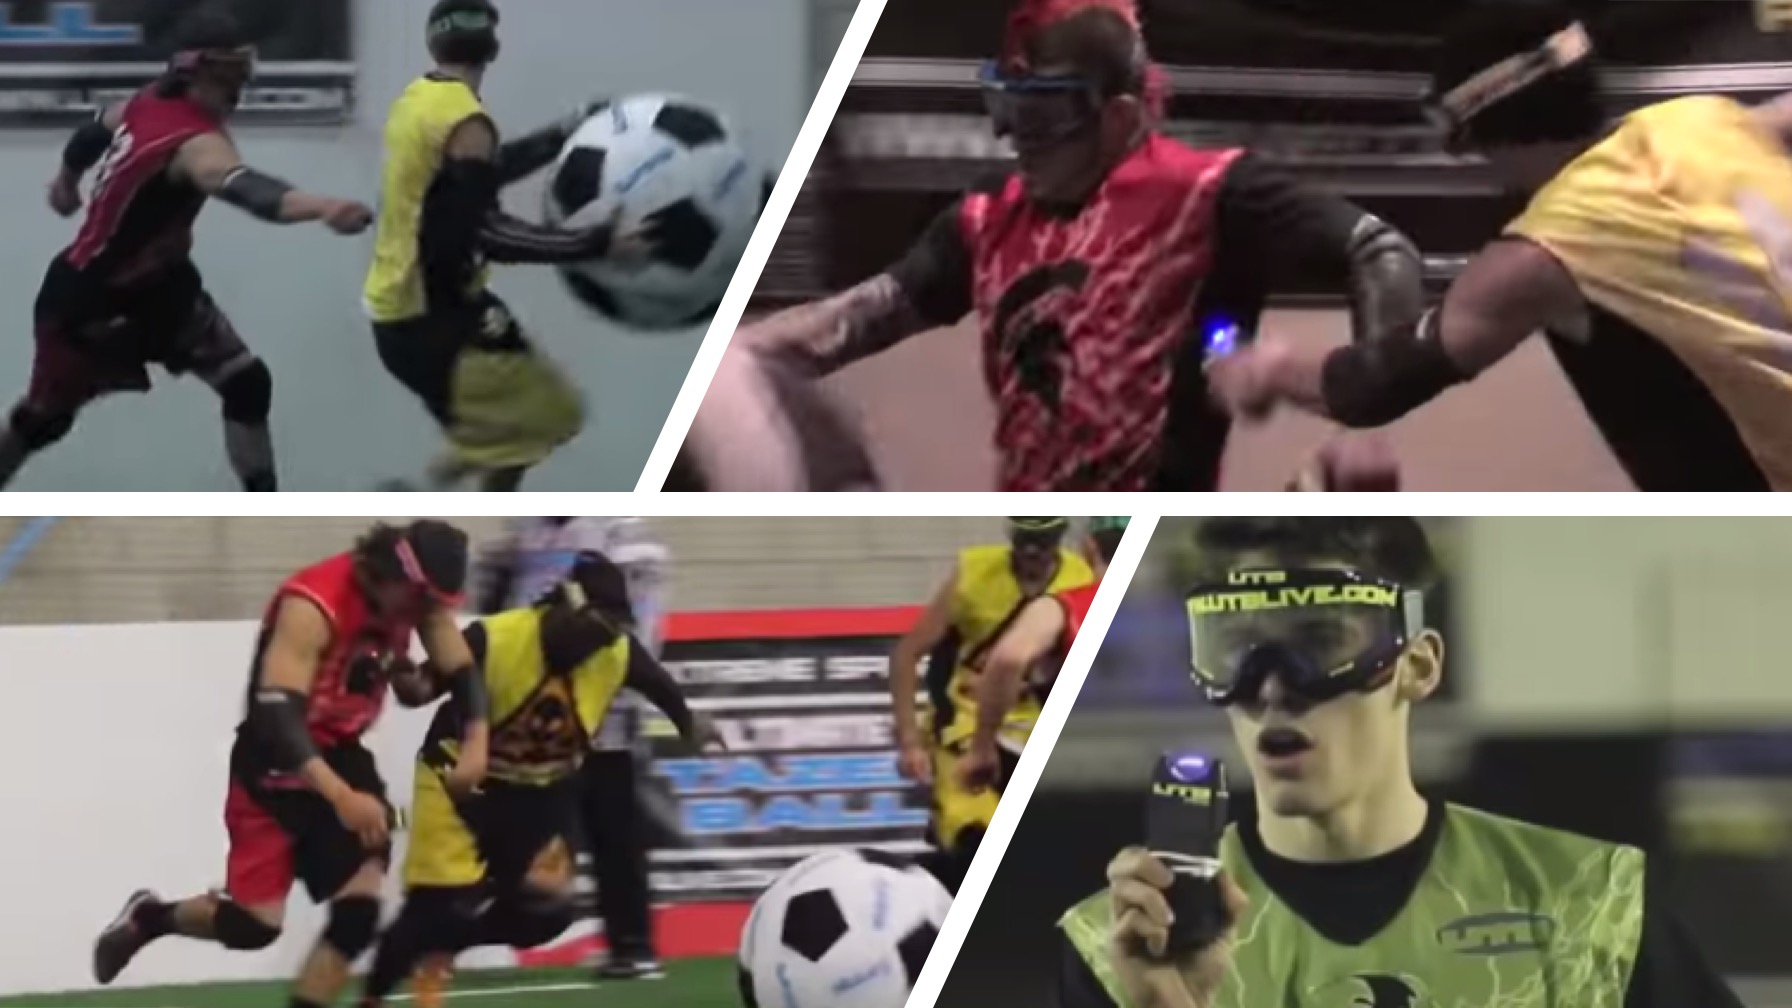 Sadly, the Soccer/Football Sport Played With Tazer Guns Is Defunct [WATCH]